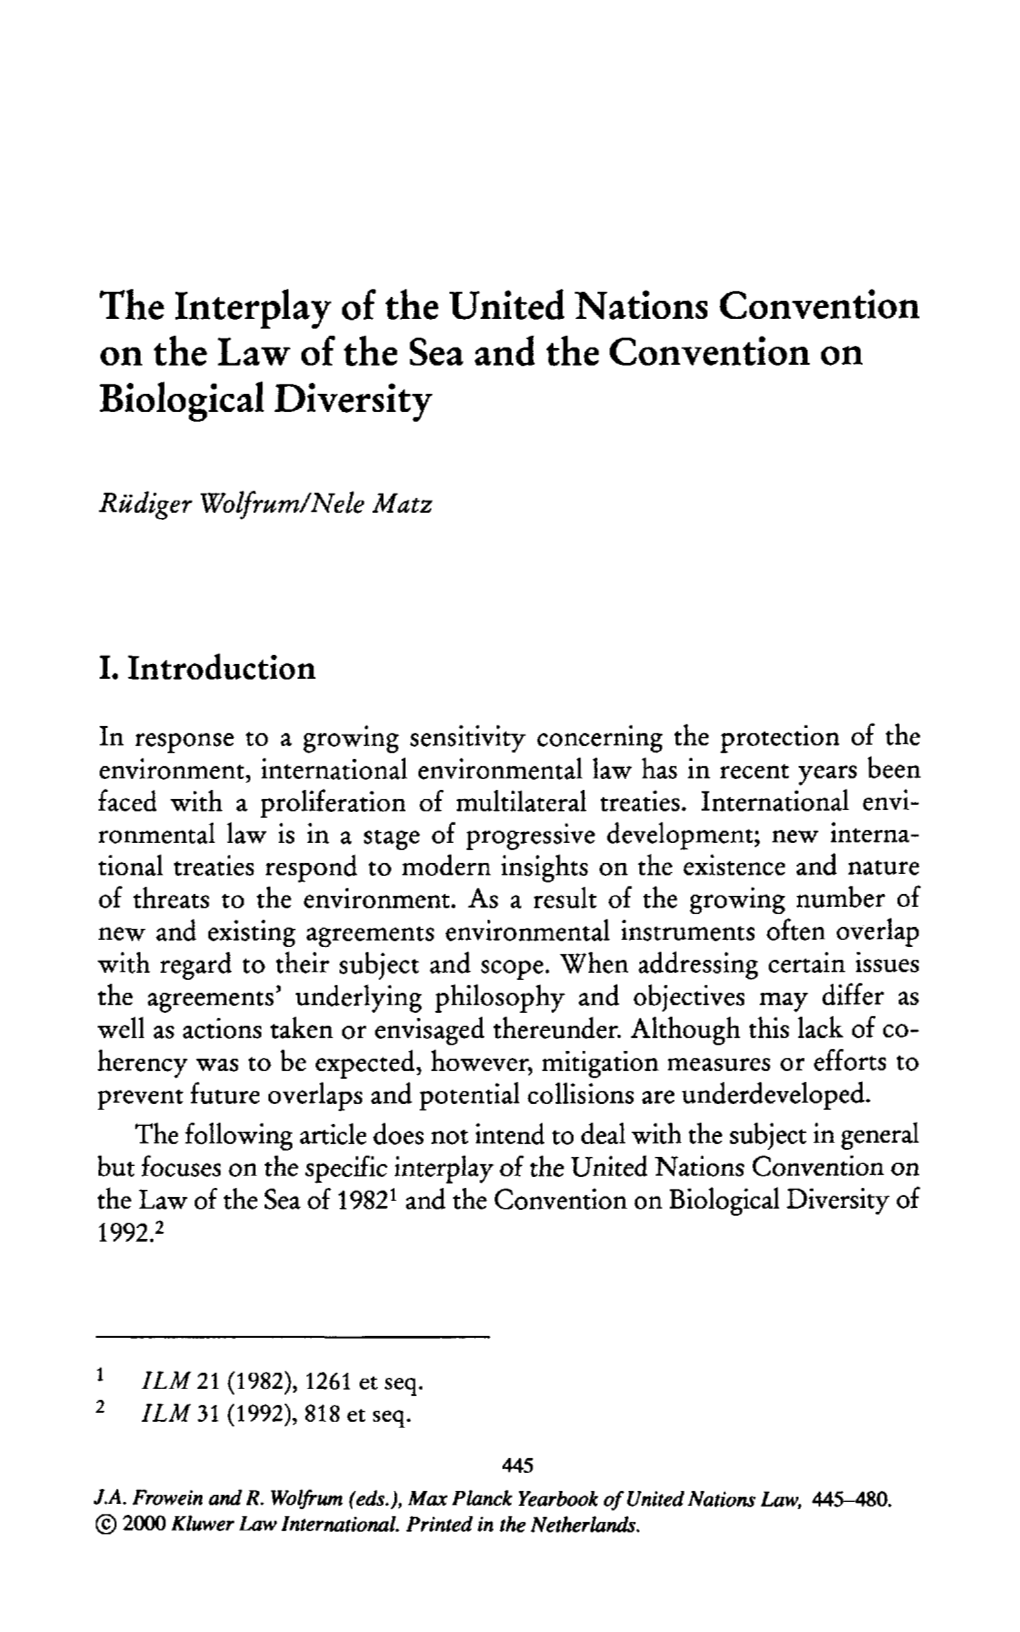 The Interplay of the United Nations Convention on the Law of the Sea and the Convention on Biological Diversity